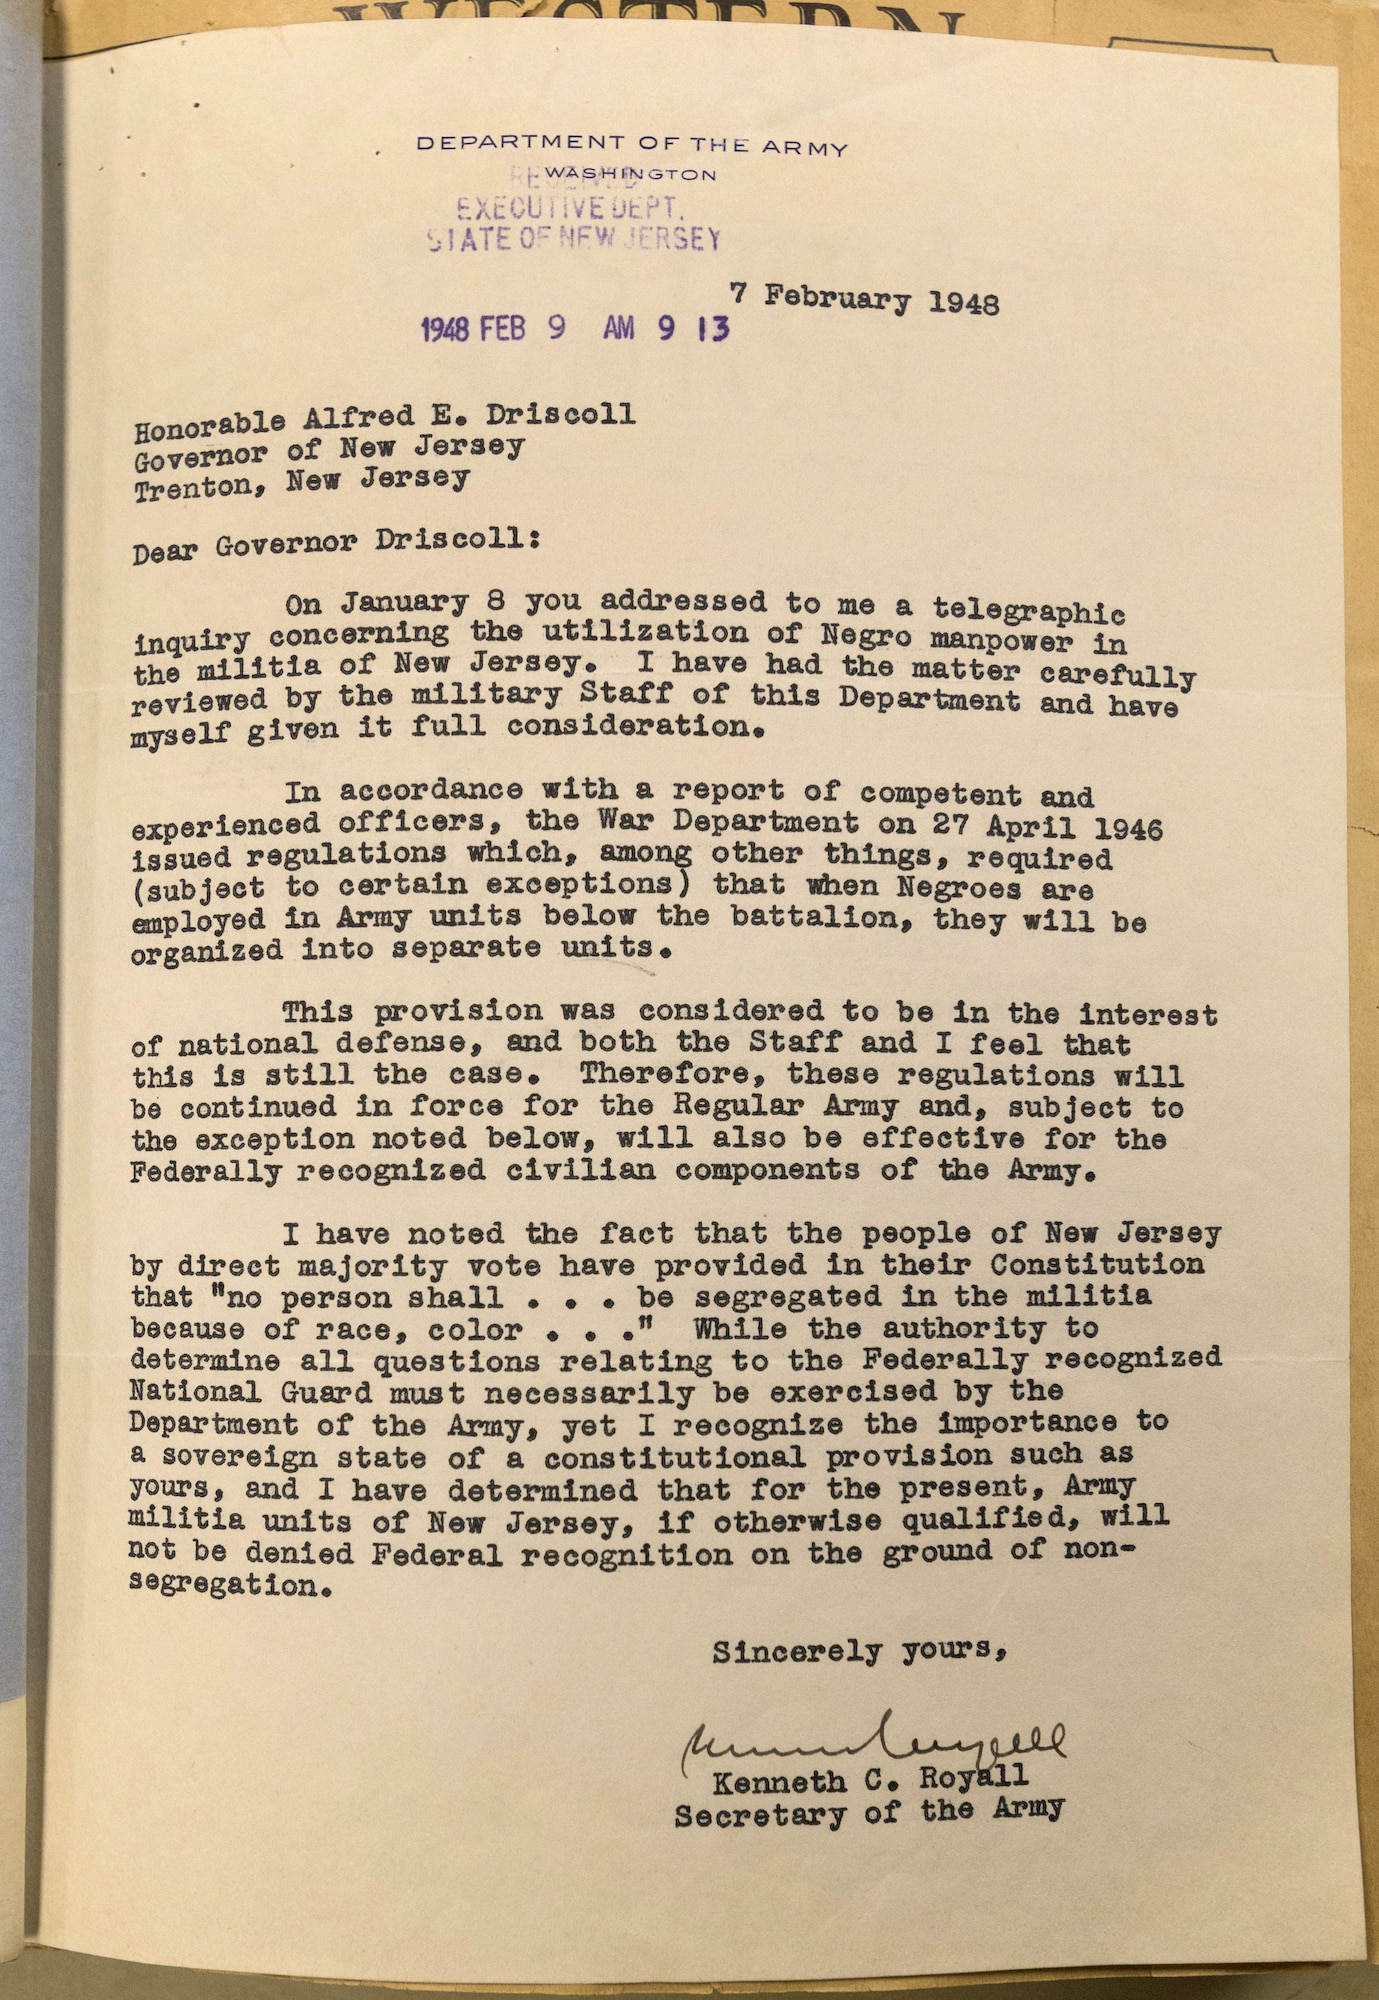 Letter from Kenneth C. Royall, Secretary of the Army, sent to New Jersey Governor Alfred E. Driscoll on Feb. 7, 1948, authorizing racially mixed units in the New Jersey Army National Guard. This made the New Jersey National Guard the first federally recognized military component to be integrated. (New Jersey National Guard photo by Mark C. Olsen)